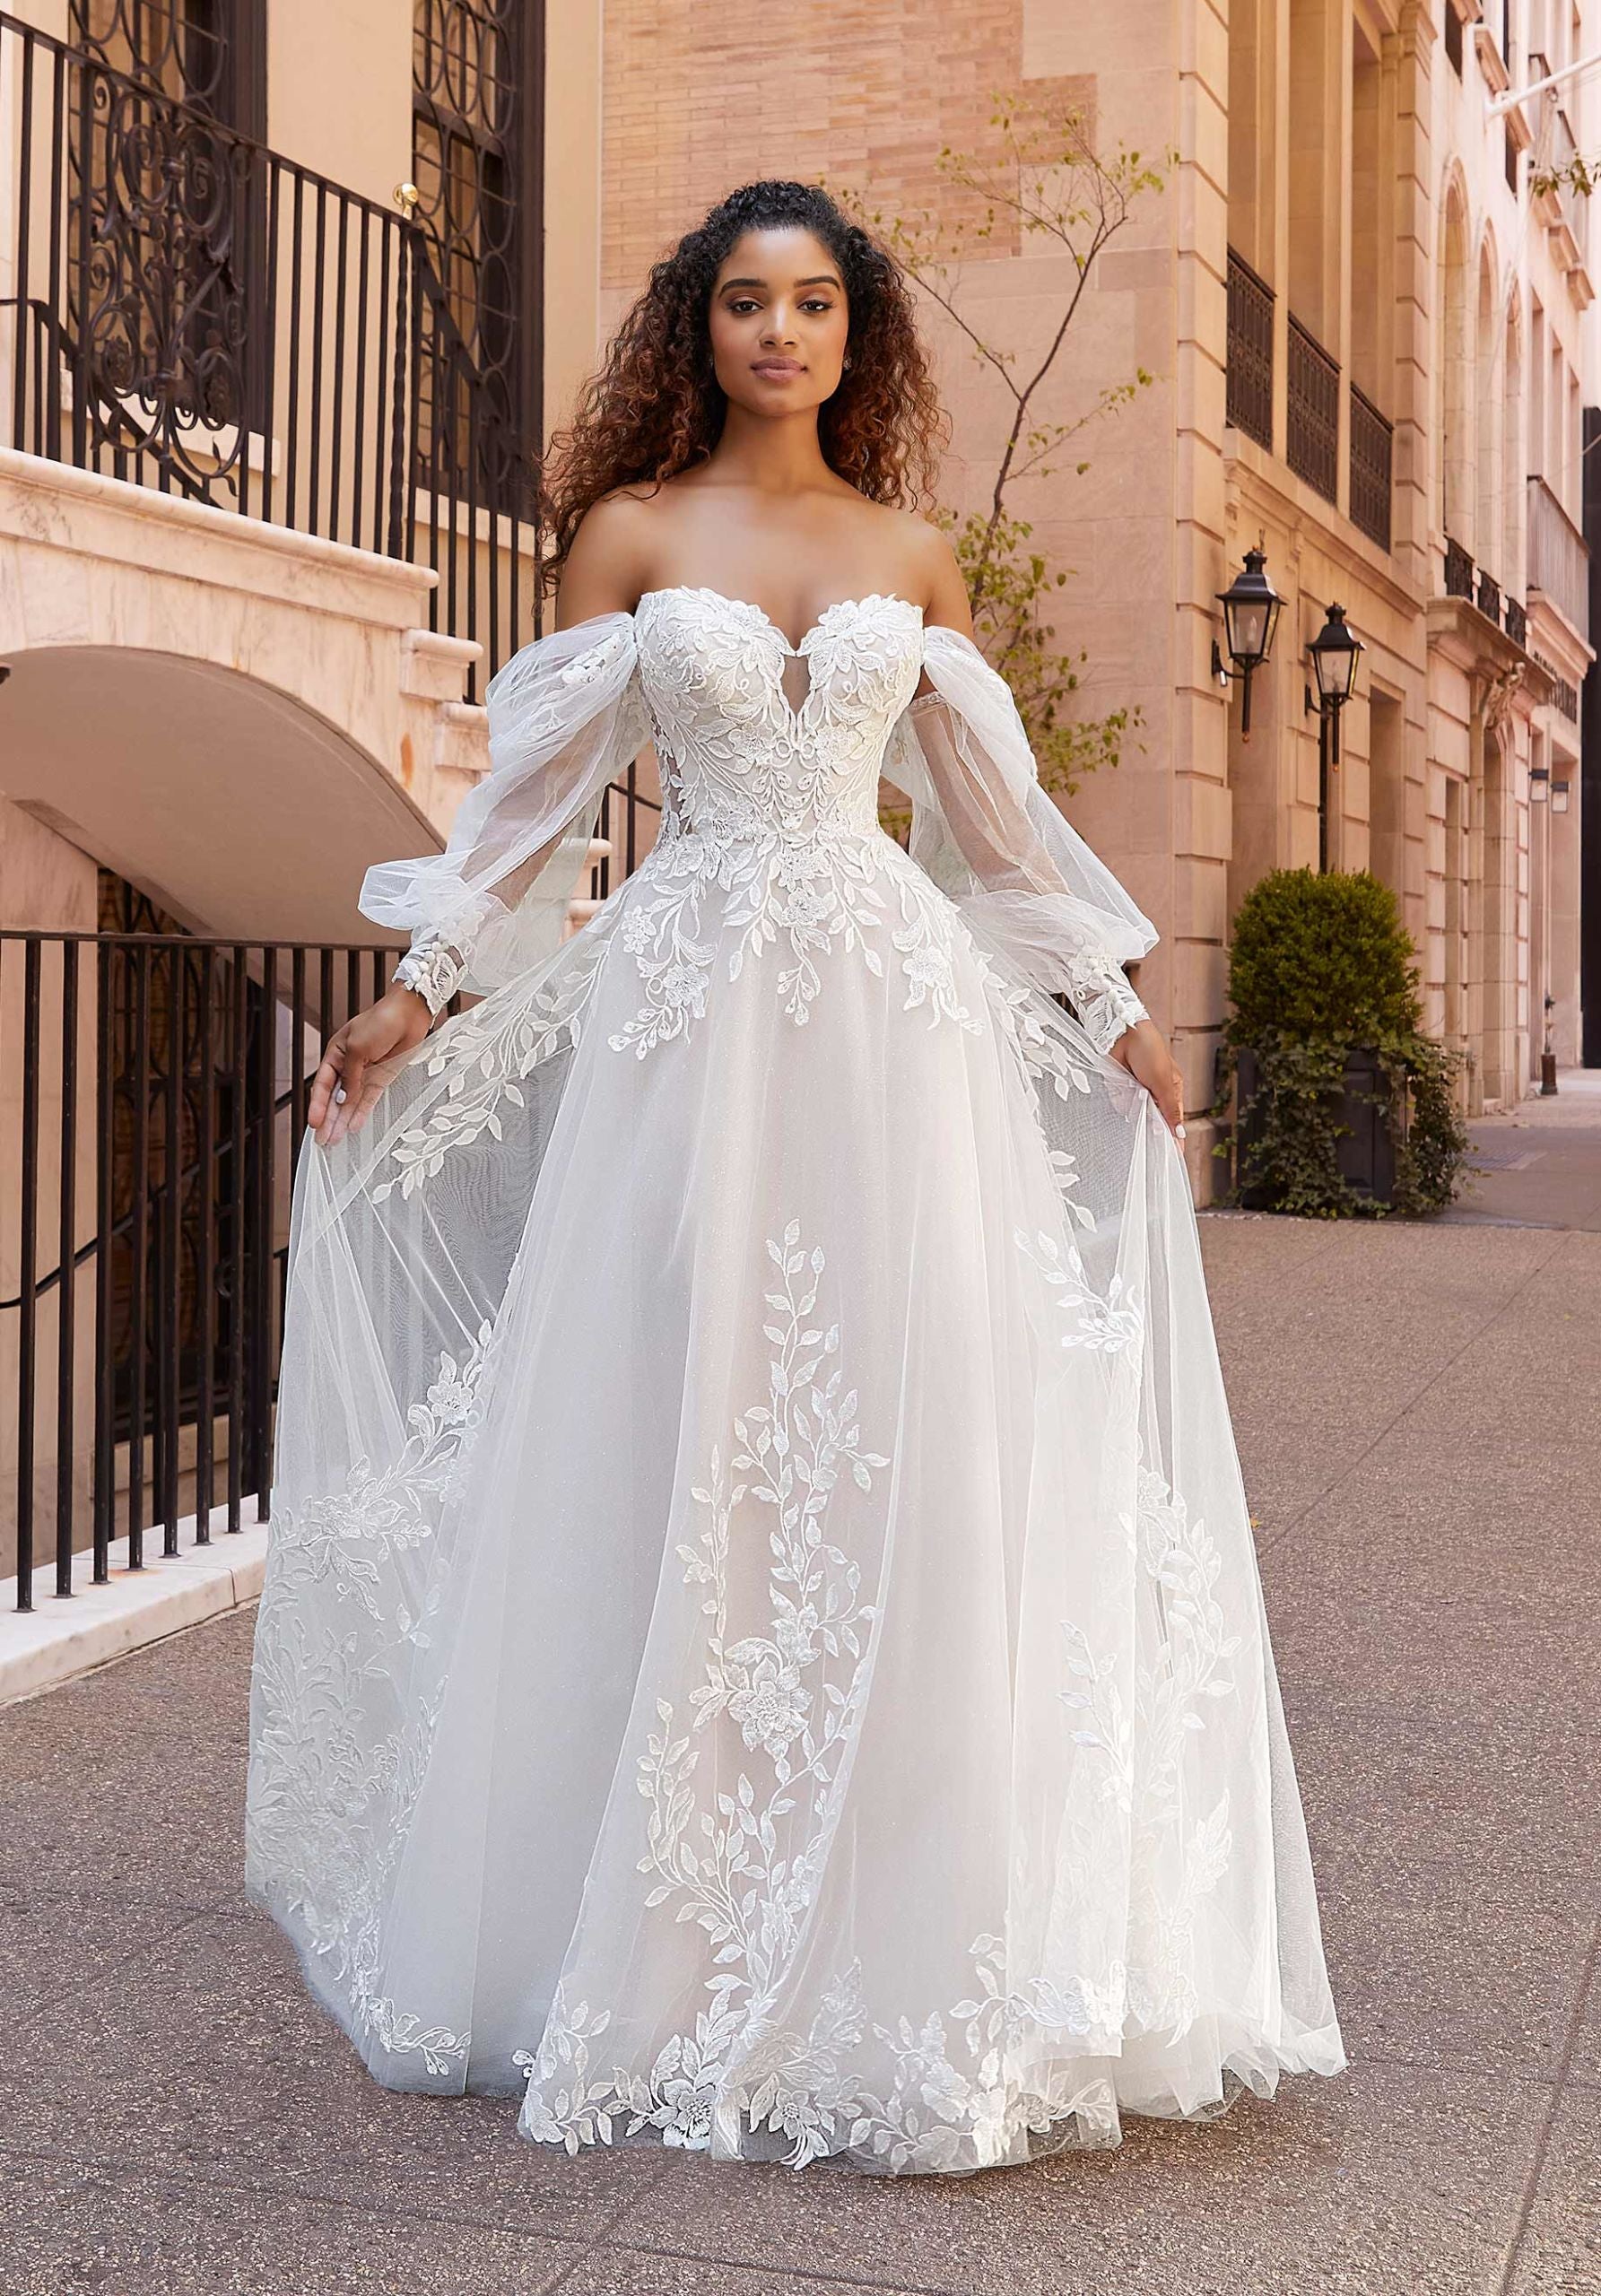 Fairy Tale Worthy Cathedral Length Lace Bridal Veil Fit For A